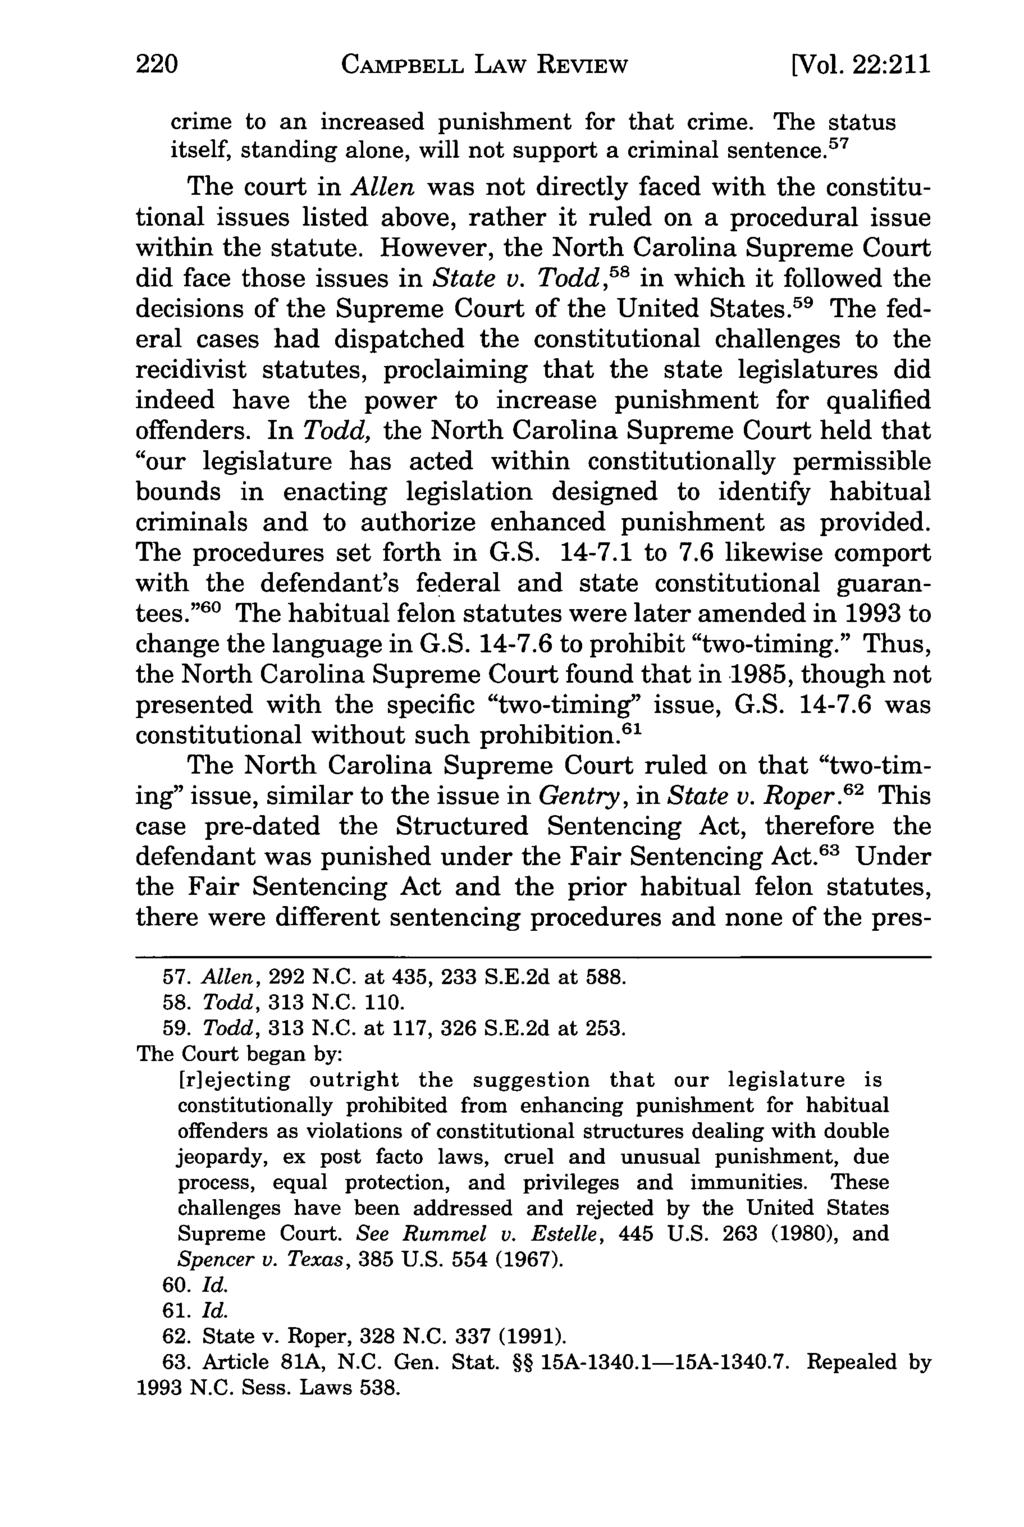 220 Campbell CAMPBELL Law Review, LAW Vol. 22, REVIEW Iss. 1 [1999], Art. 7 [Vol. 22:211 crime to an increased punishment for that crime.